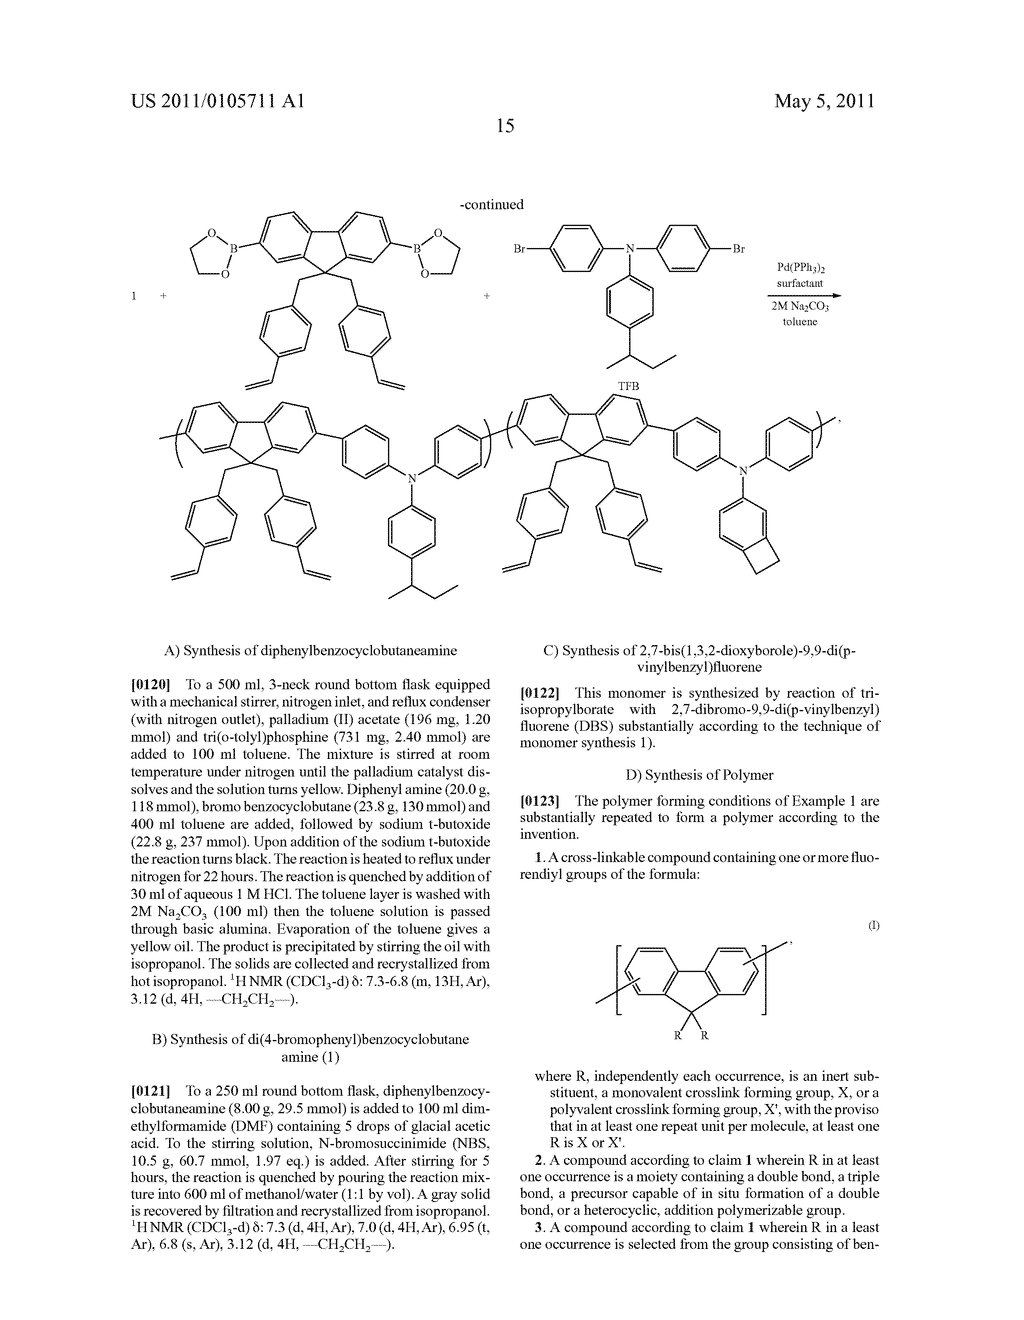 CROSSLINKABLE SUBSTITUTED FLUORENE COMPOUNDS AND CONJUGATED OLIGOMERS OR POLYMERS BASED THEREON - diagram, schematic, and image 16